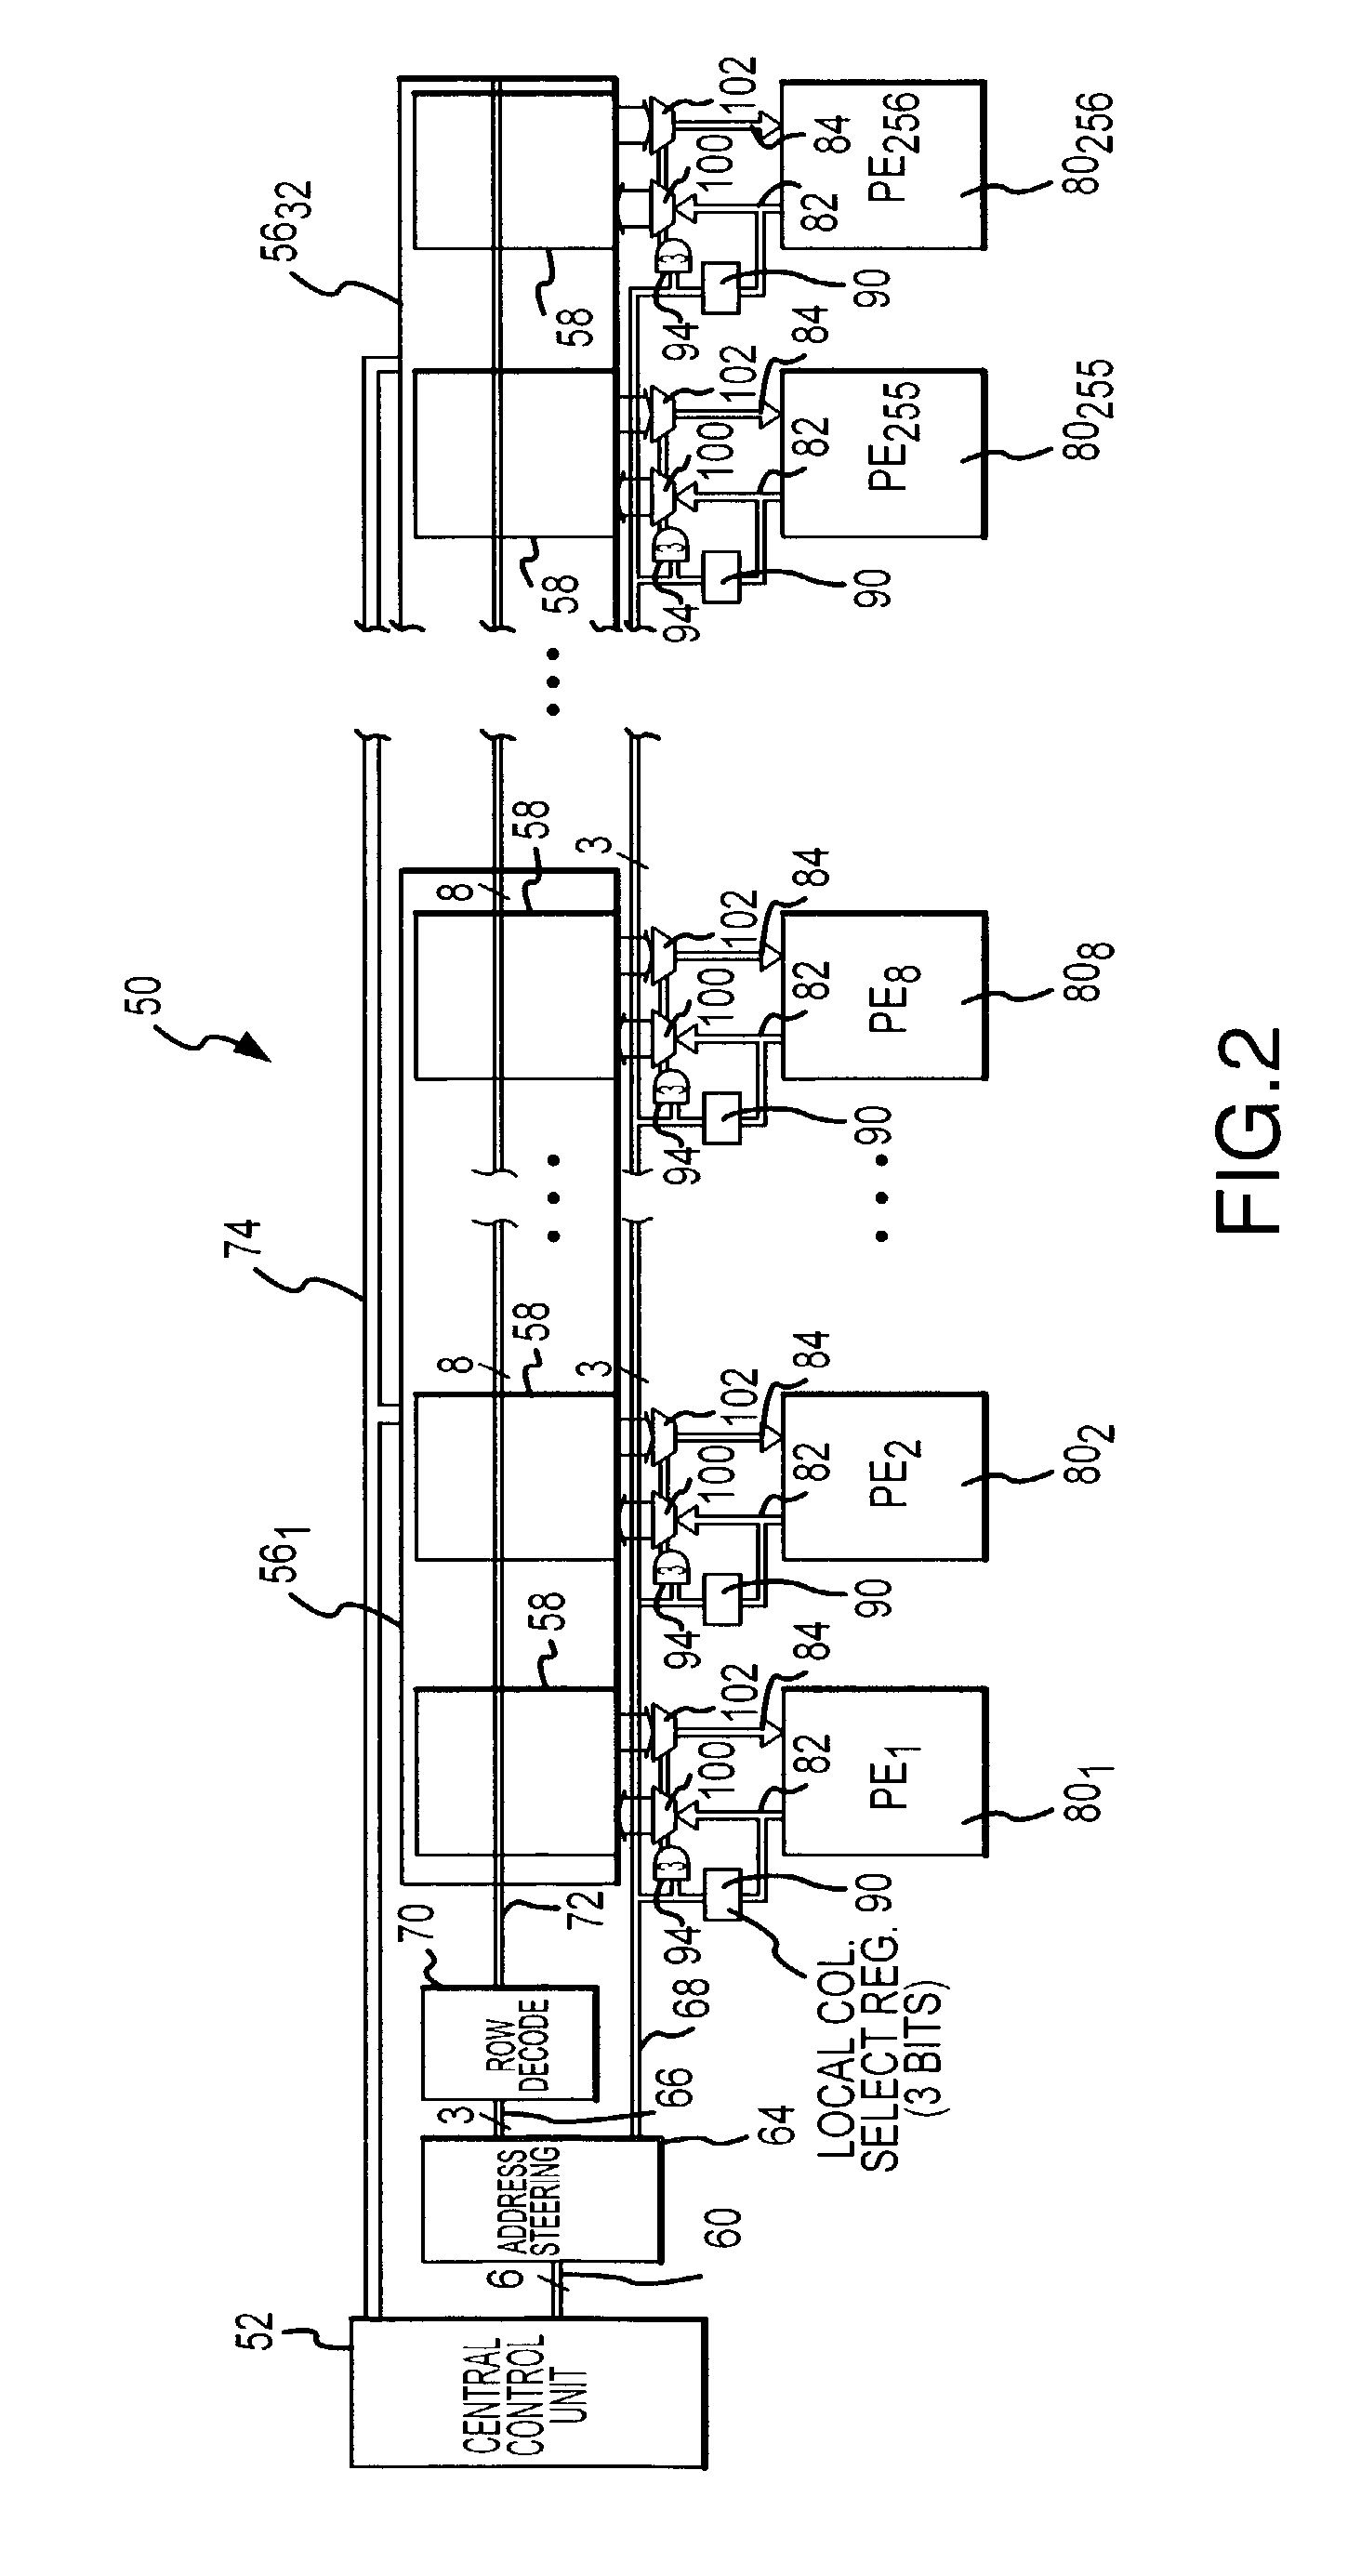 Method and system for local memory addressing in single instruction, multiple data computer system